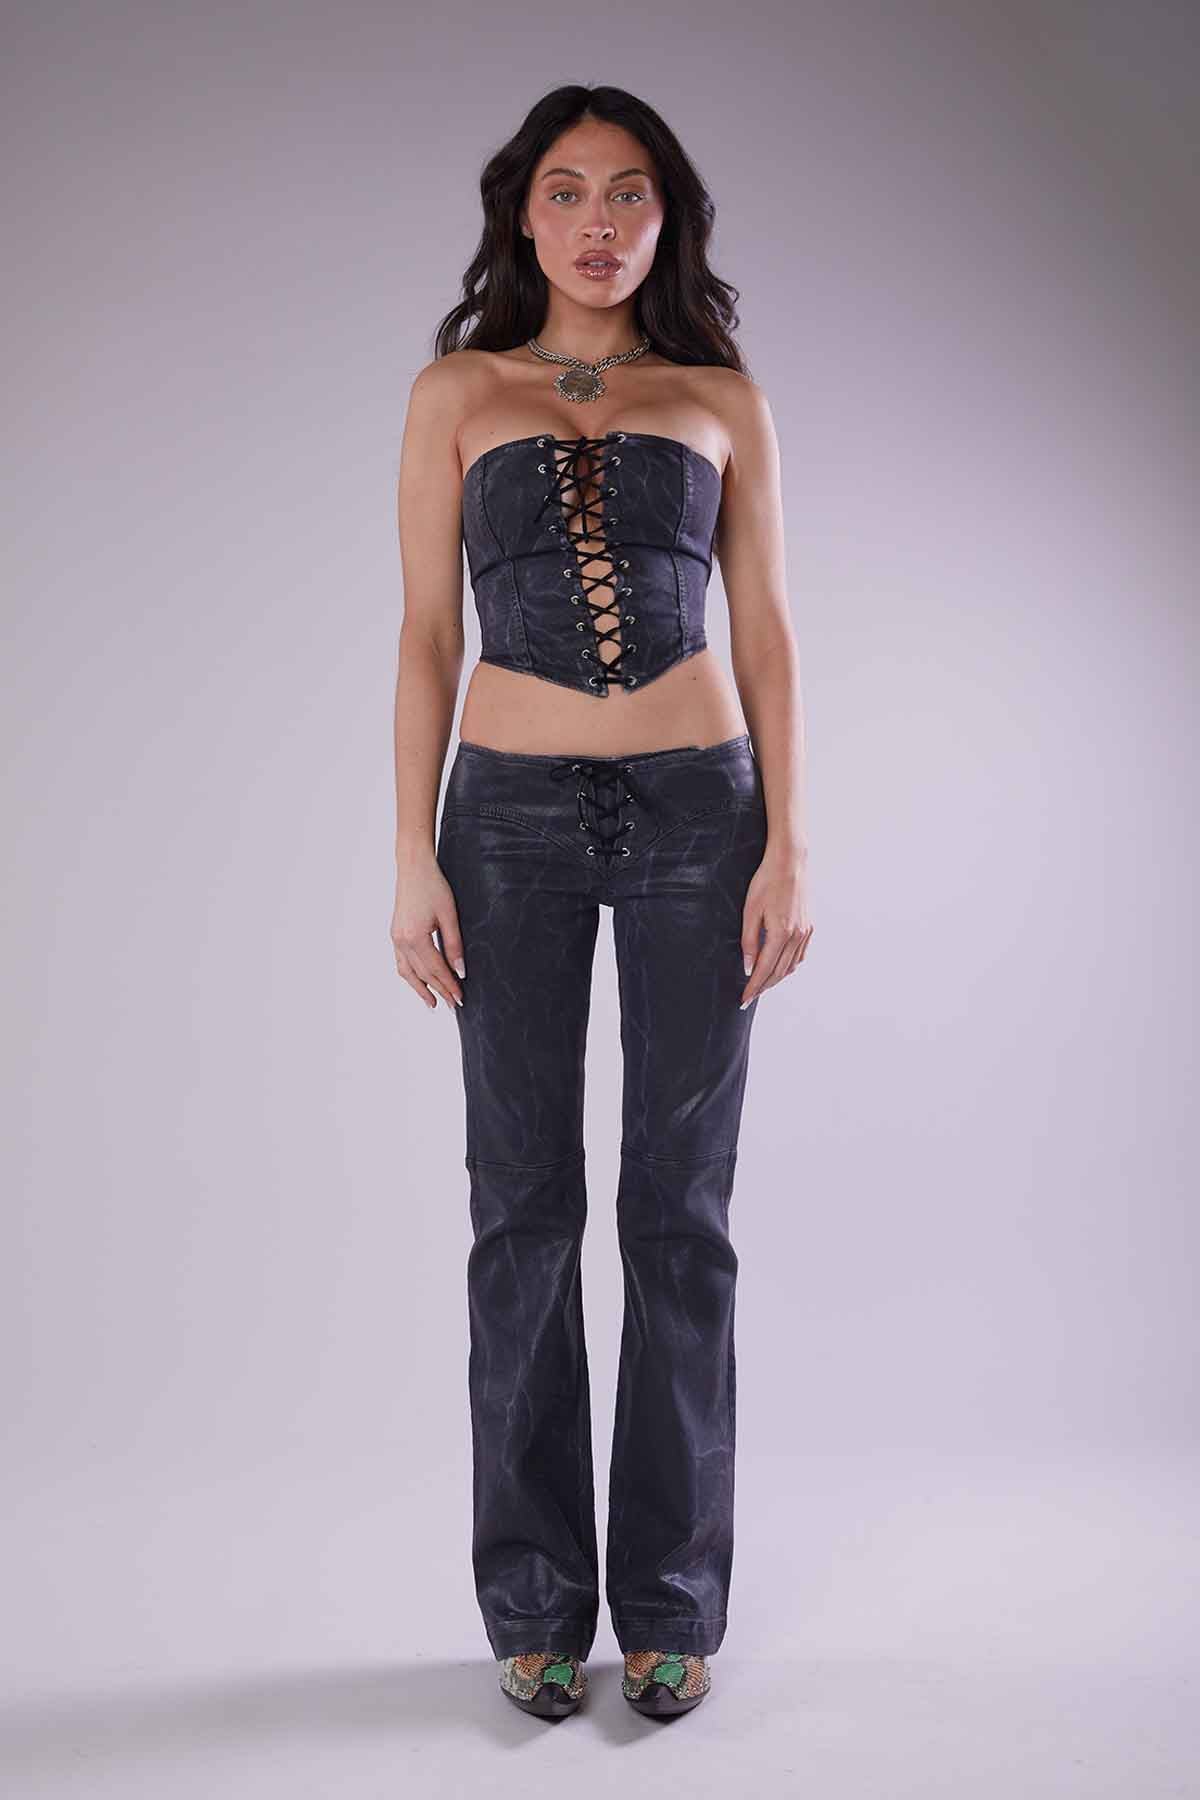 Center Stage Corset / Outlaw